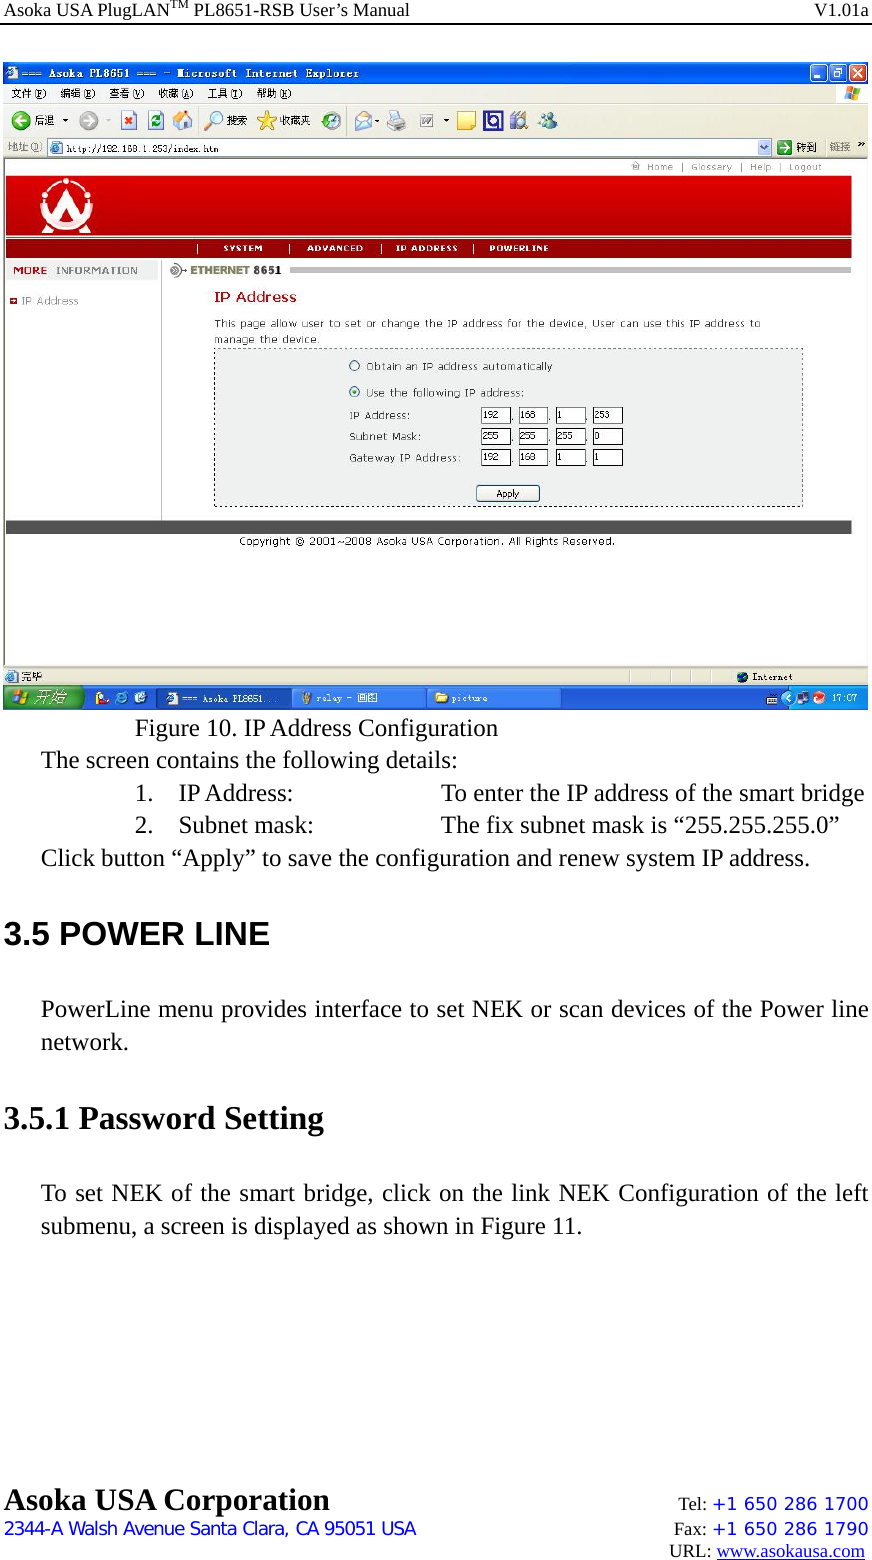 Asoka USA PlugLANTM PL8651-RSB User’s Manual    V1.01a     Figure 10. IP Address Configuration The screen contains the following details: 1. IP Address:    To enter the IP address of the smart bridge 2. Subnet mask:      The fix subnet mask is “255.255.255.0” Click button “Apply” to save the configuration and renew system IP address. 3.5 POWER LINE   PowerLine menu provides interface to set NEK or scan devices of the Power line network. 3.5.1 Password Setting To set NEK of the smart bridge, click on the link NEK Configuration of the left submenu, a screen is displayed as shown in Figure 11. Asoka USA Corporation    Tel: +1 650 286 1700    2344-A Walsh Avenue Santa Clara, CA 95051 USA   Fax: +1 650 286 1790                                                                                     URL: www.asokausa.com 